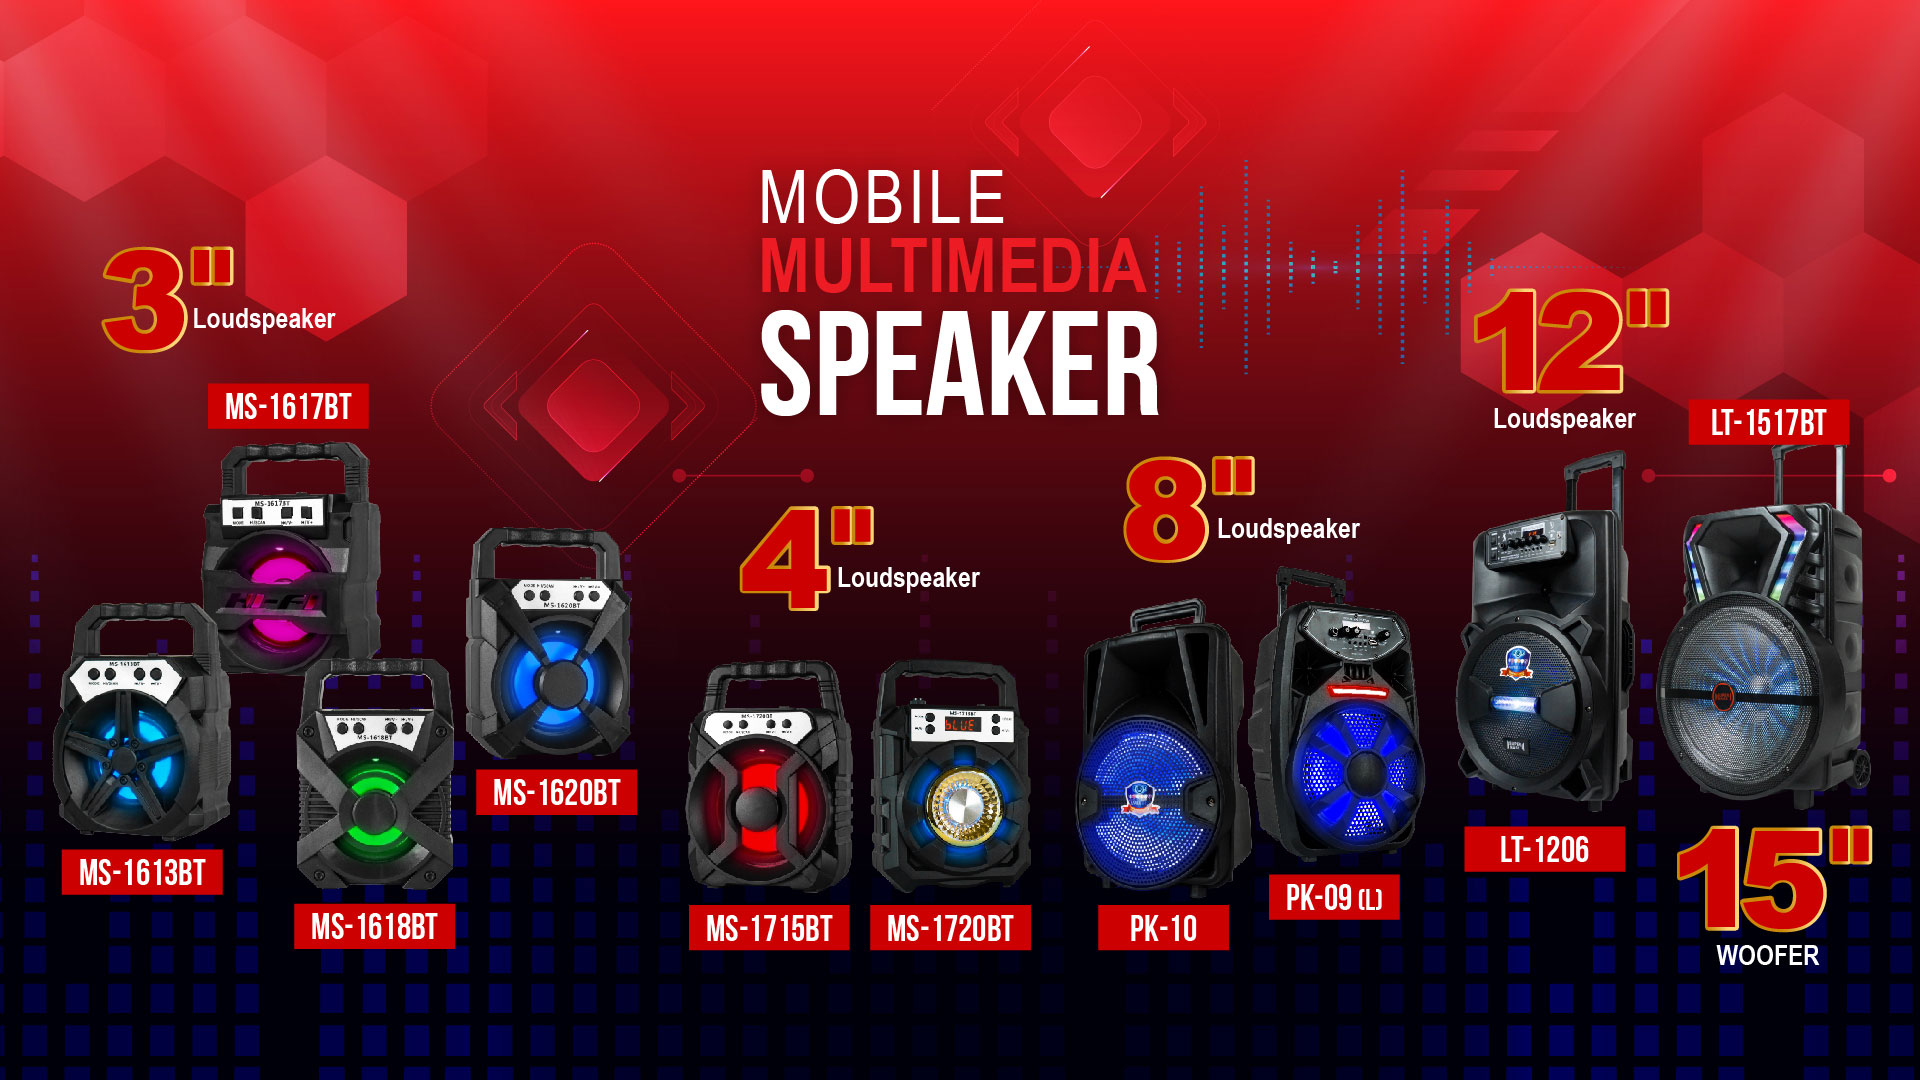 altr-ultimate-ecommerce_gpower_wdd_home_graphic_main-slider_20200827-product-intro-mobile-multimedia-speaker-series.jpg